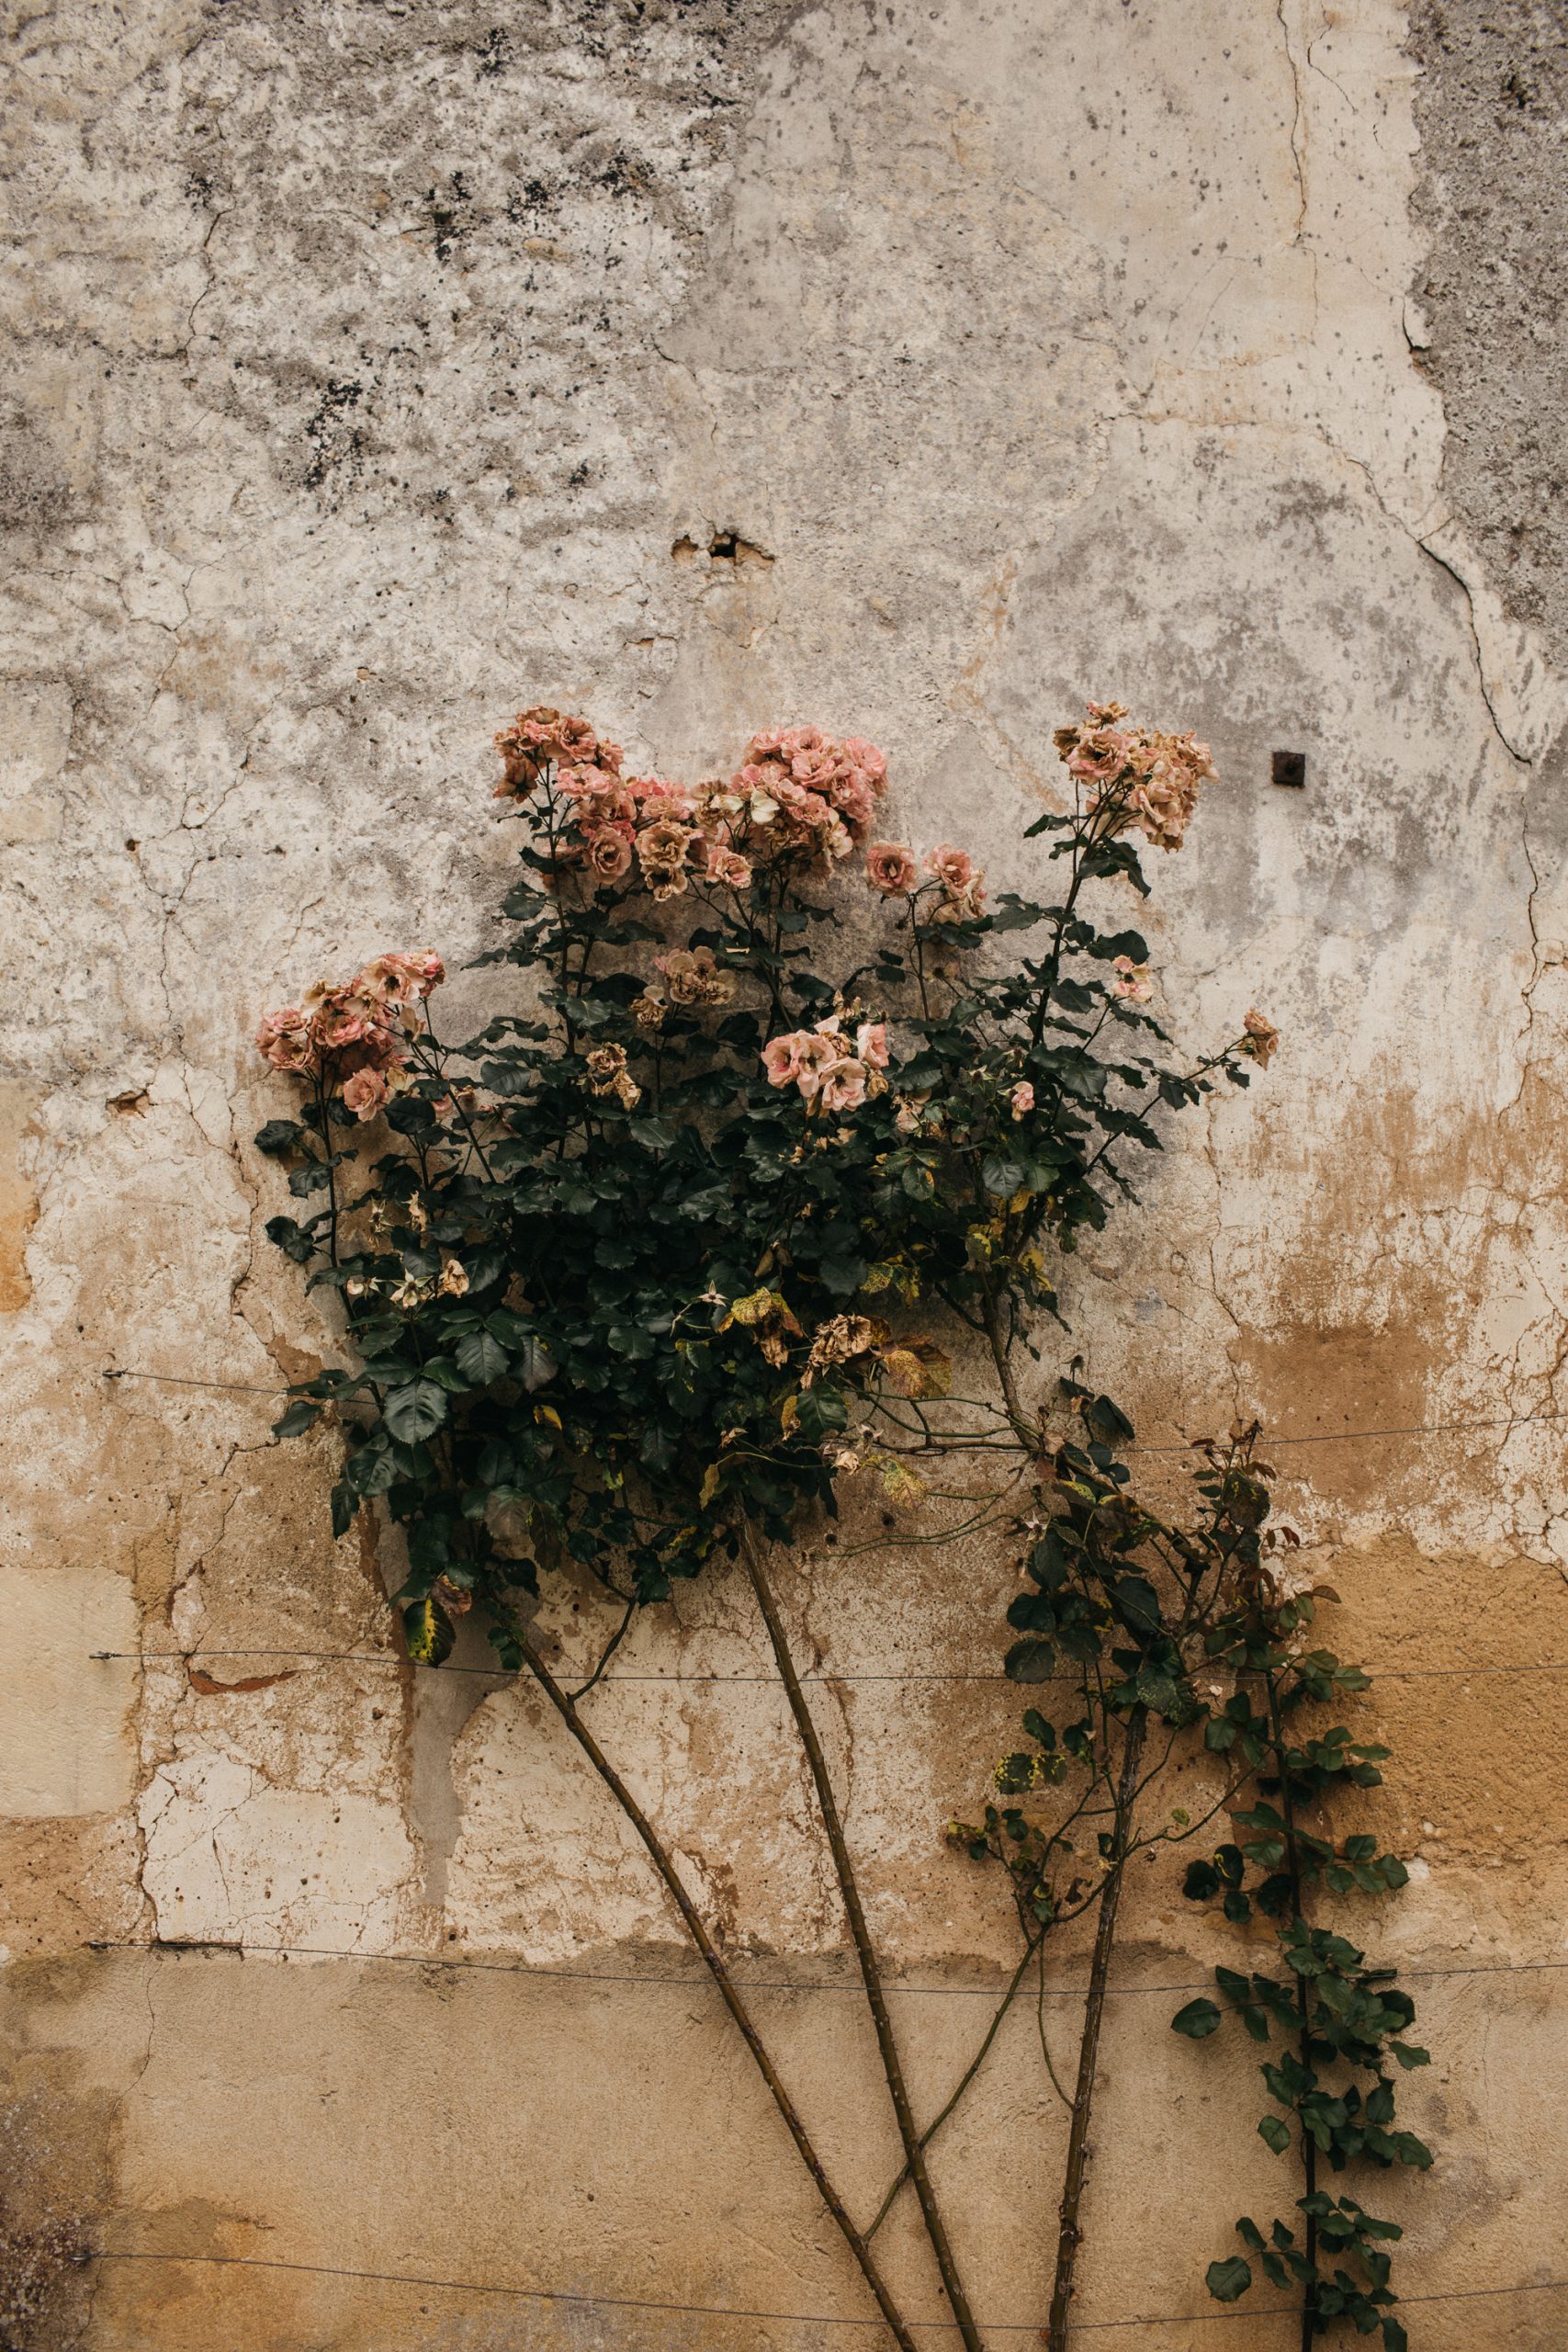 Roses growing on old stone wall scaled